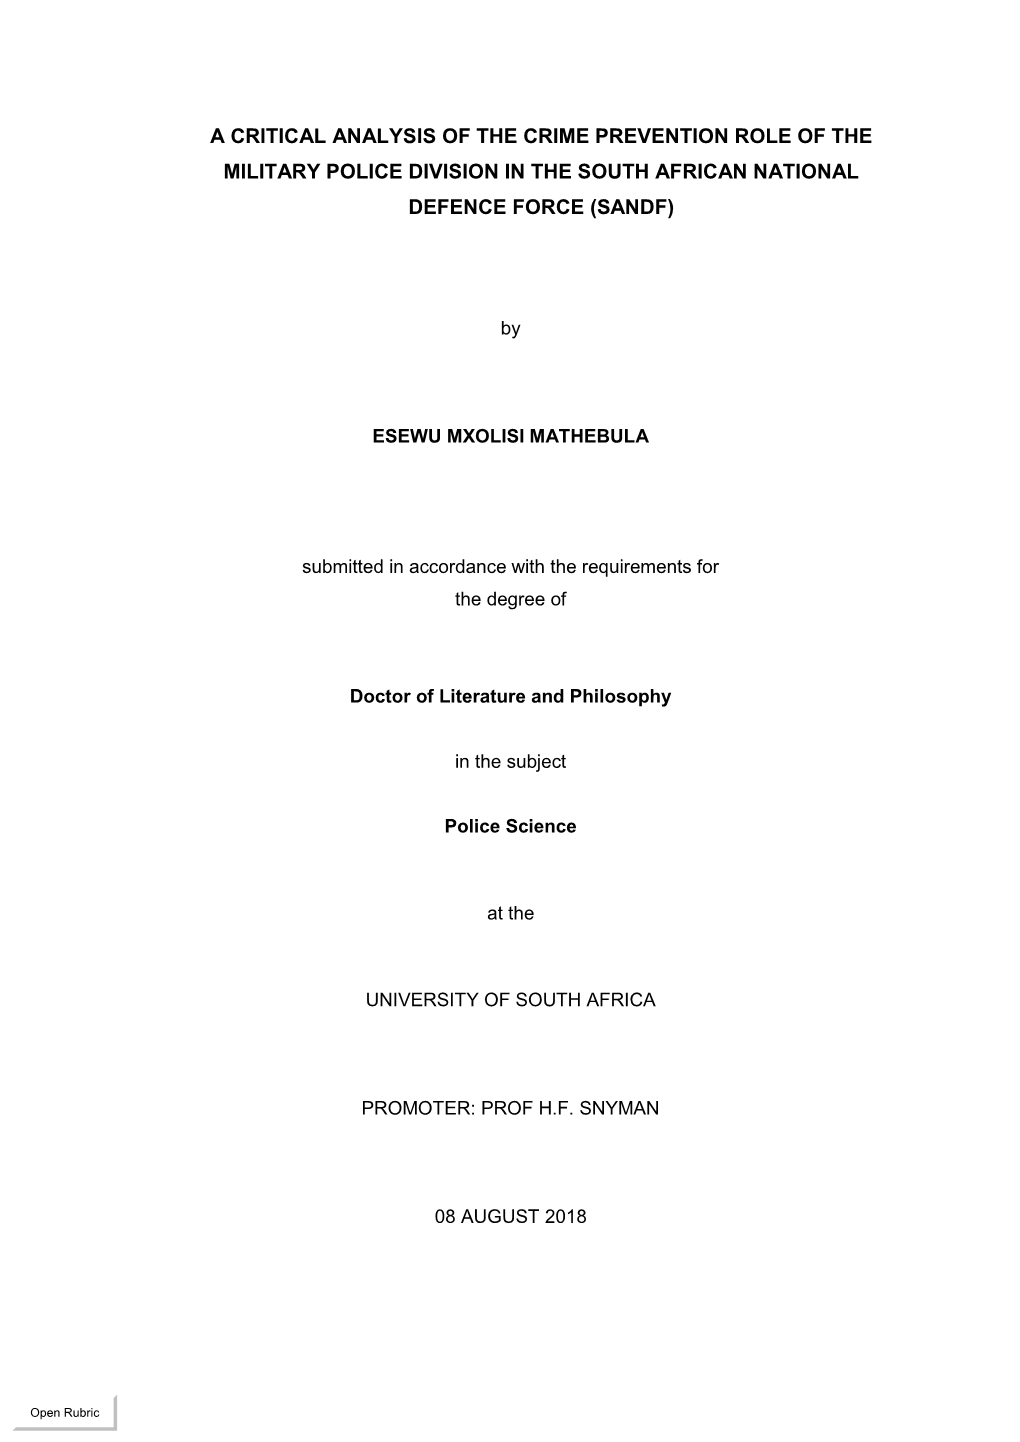 A Critical Analysis of the Crime Prevention Role of the Military Police Division in the South African National Defence Force (Sandf)